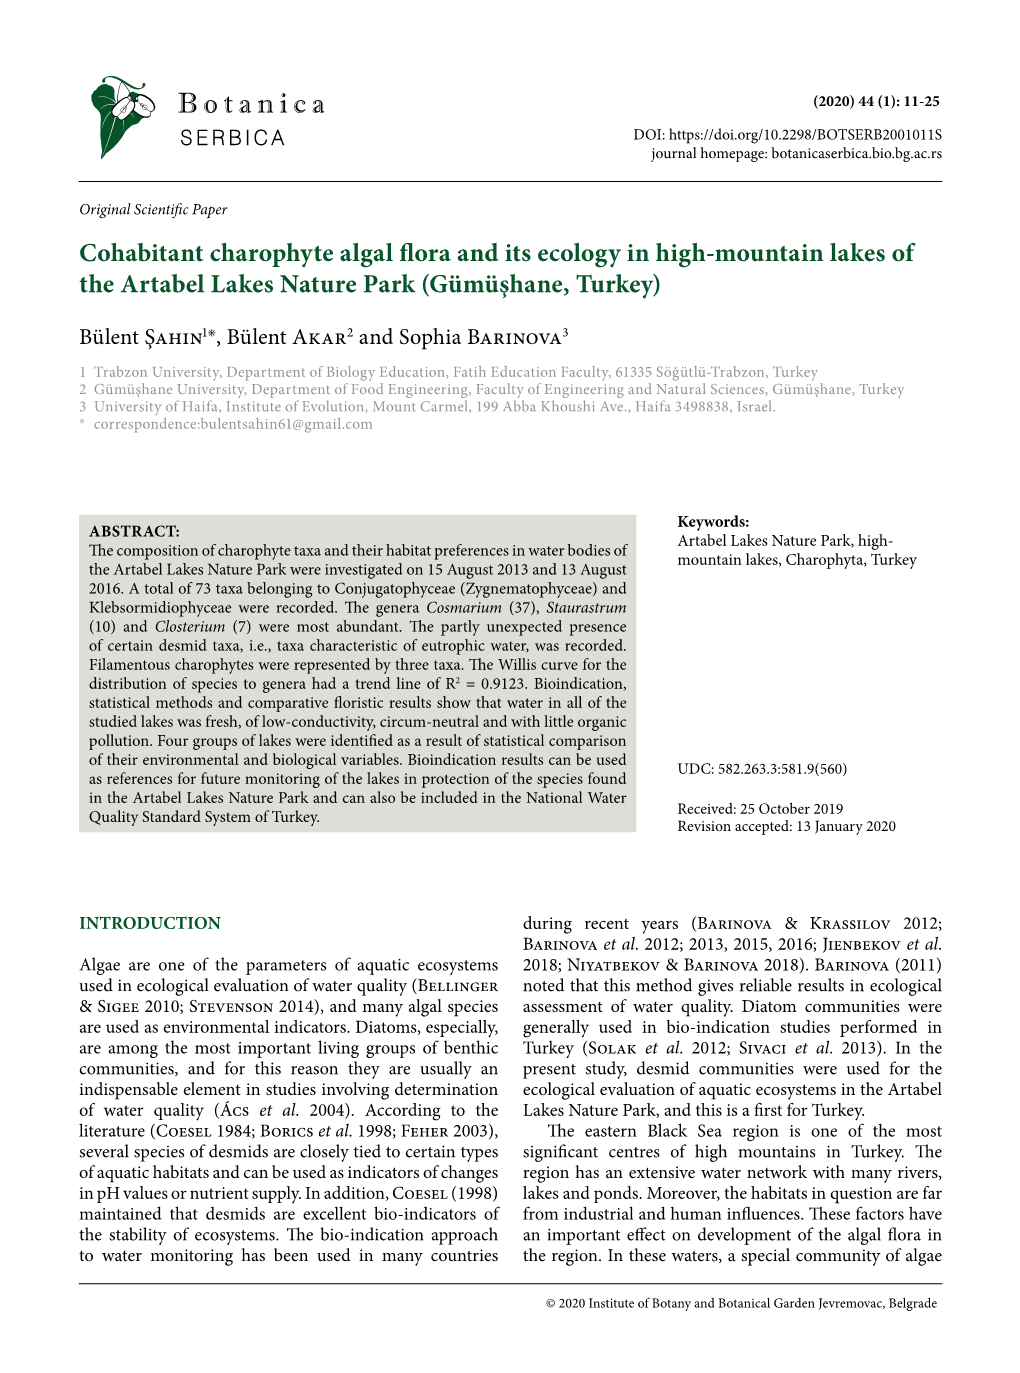 Cohabitant Charophyte Algal Flora and Its Ecology in High-Mountain Lakes of the Artabel Lakes Nature Park (Gümüşhane, Turkey)